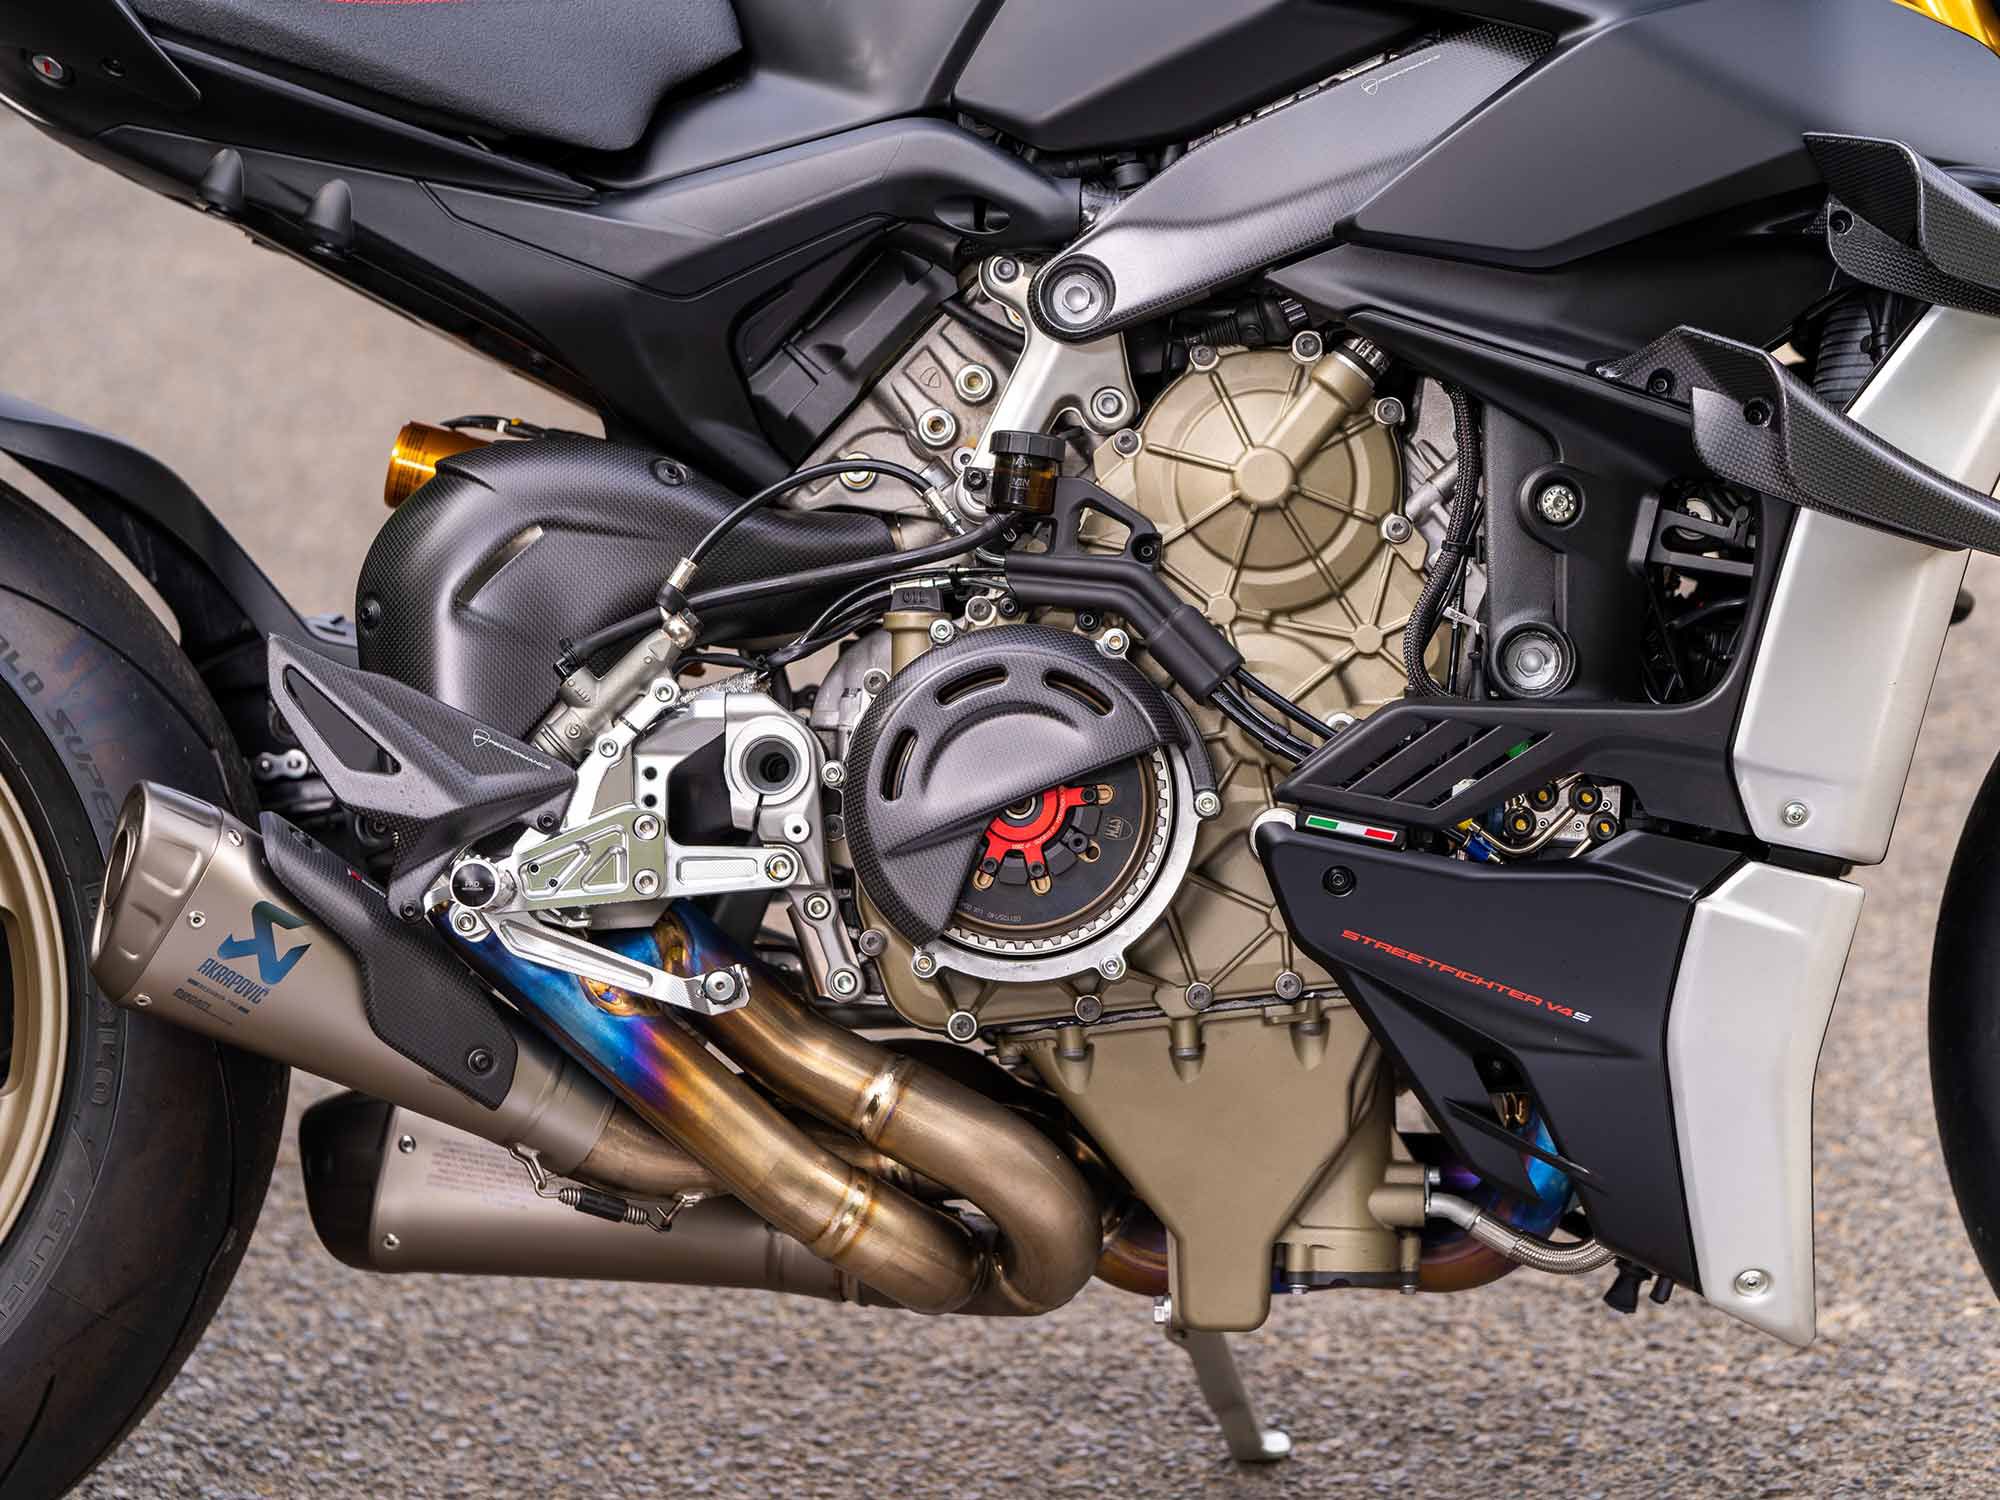 The dry clutch conversion kit is an absolute must-have. If you’re an old school Ducati superbike guy or gal, you need this setup.